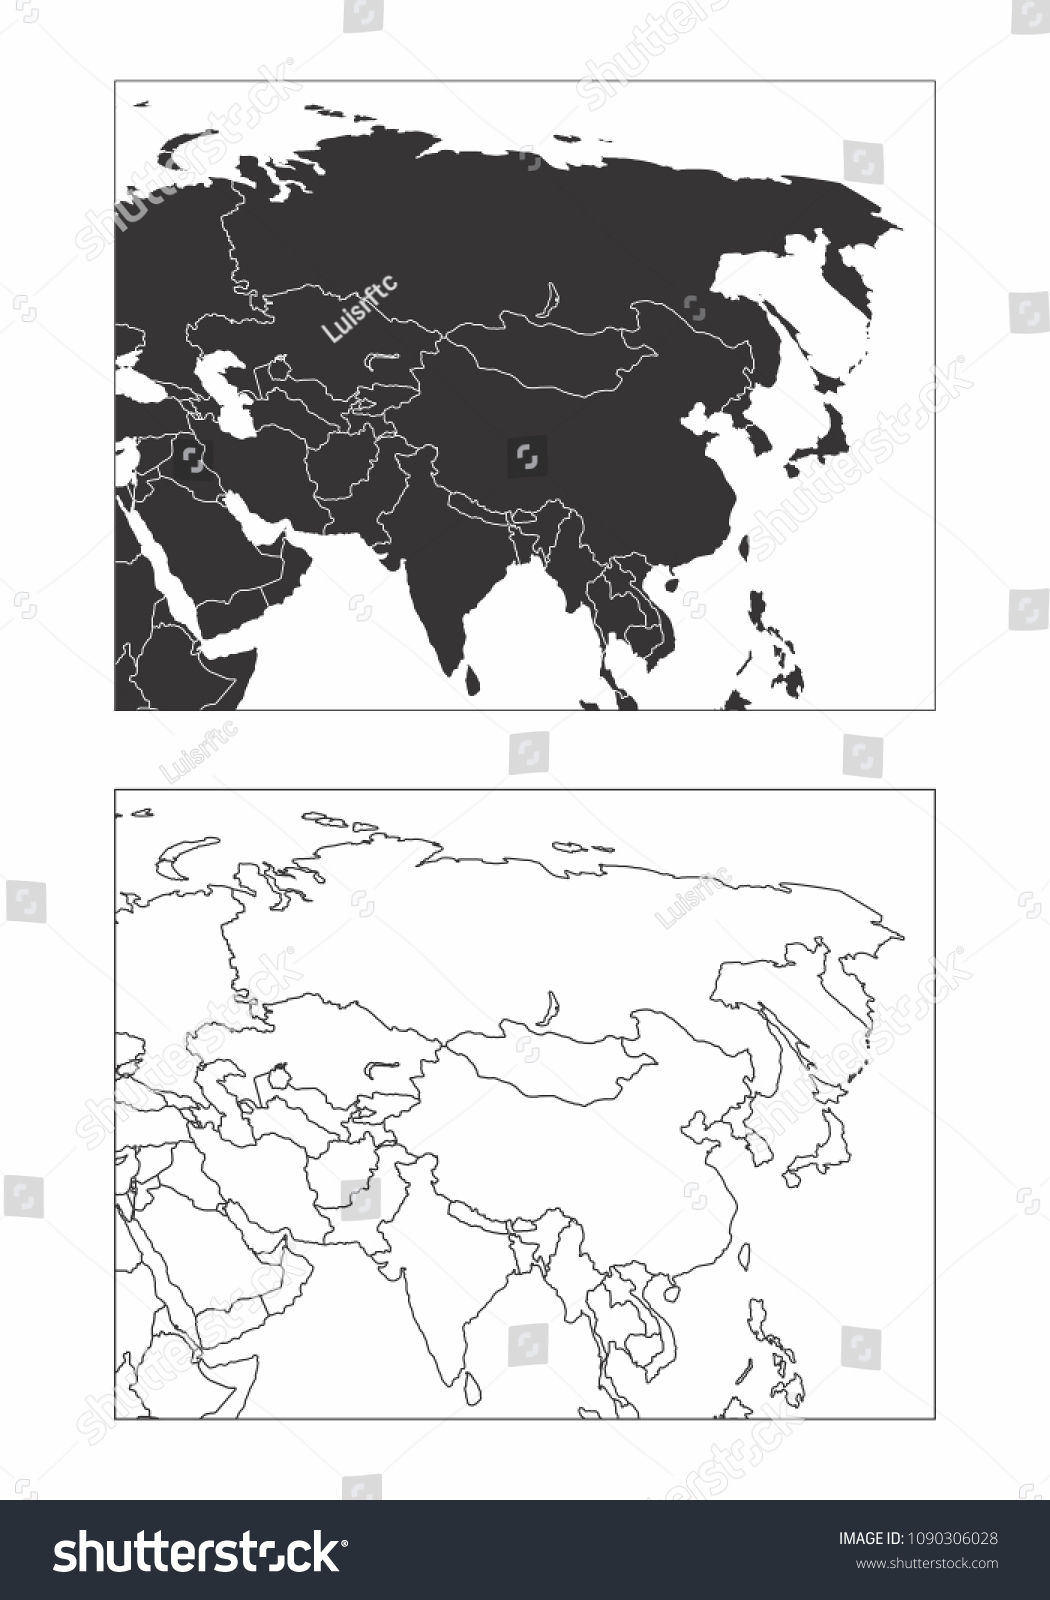 Simplified Maps Asia Countries Borders Black Stock Illustration 1090306028 0404